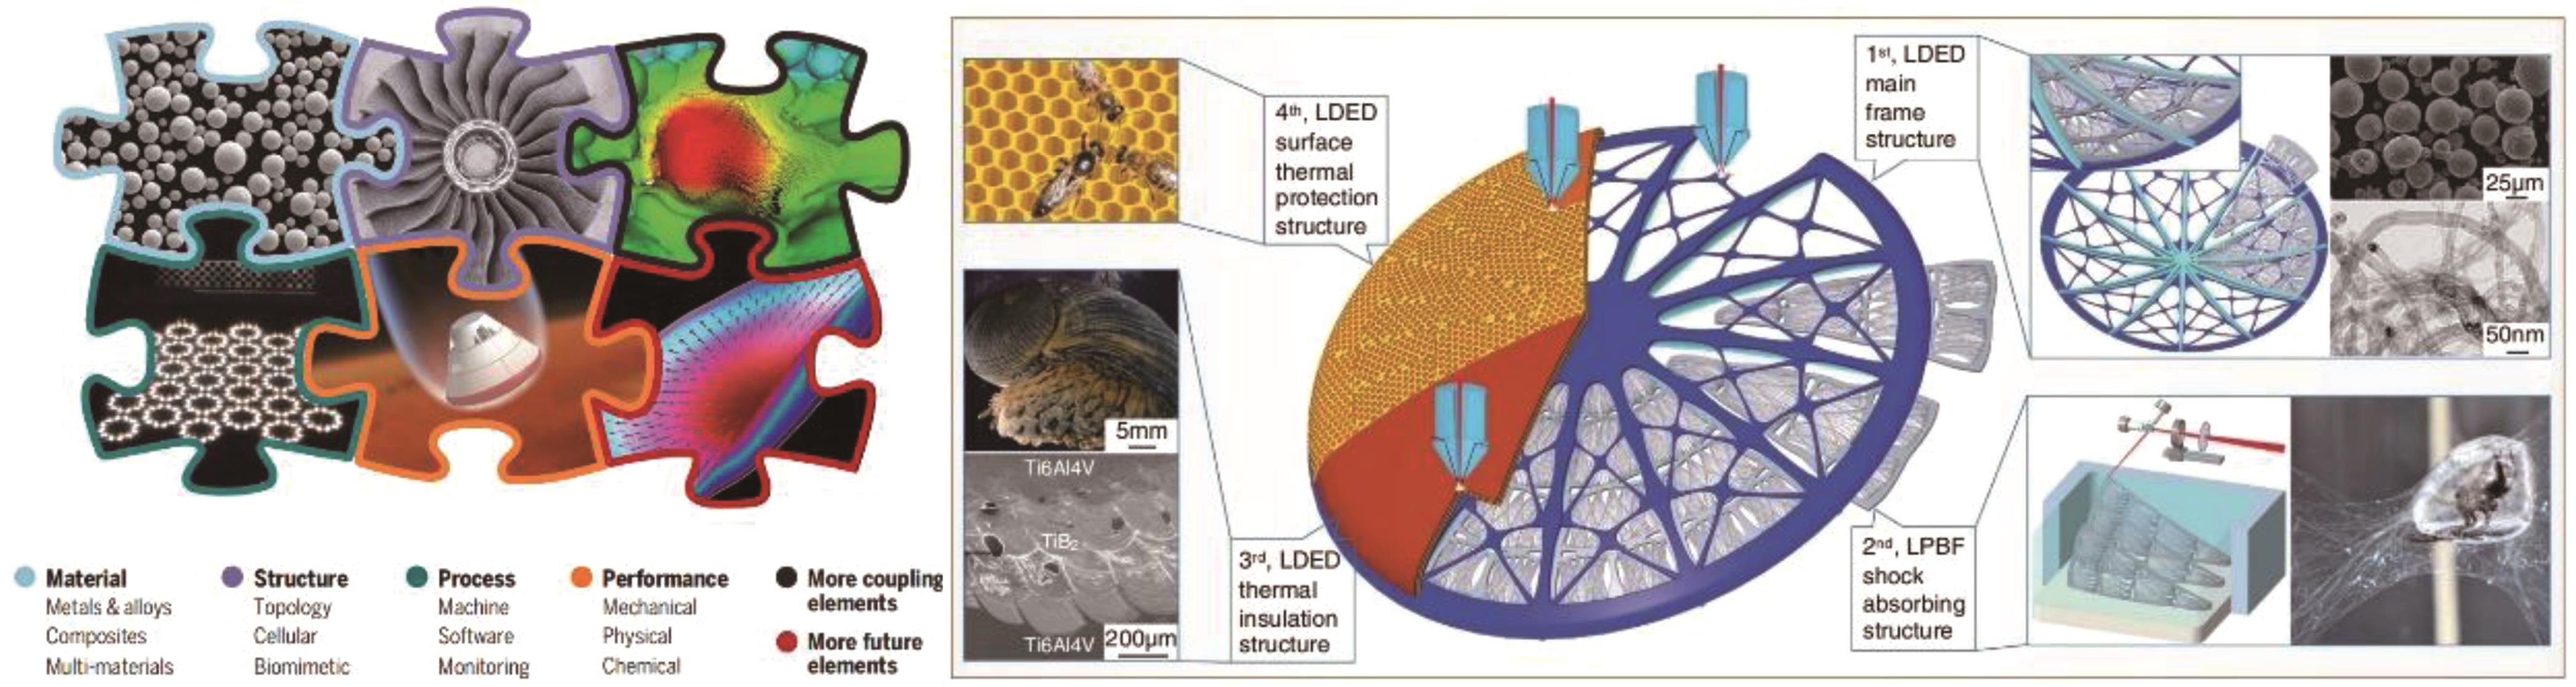 Material‒structure‒performance integrated LAM technology in multifunctional design and manufacturing[7]